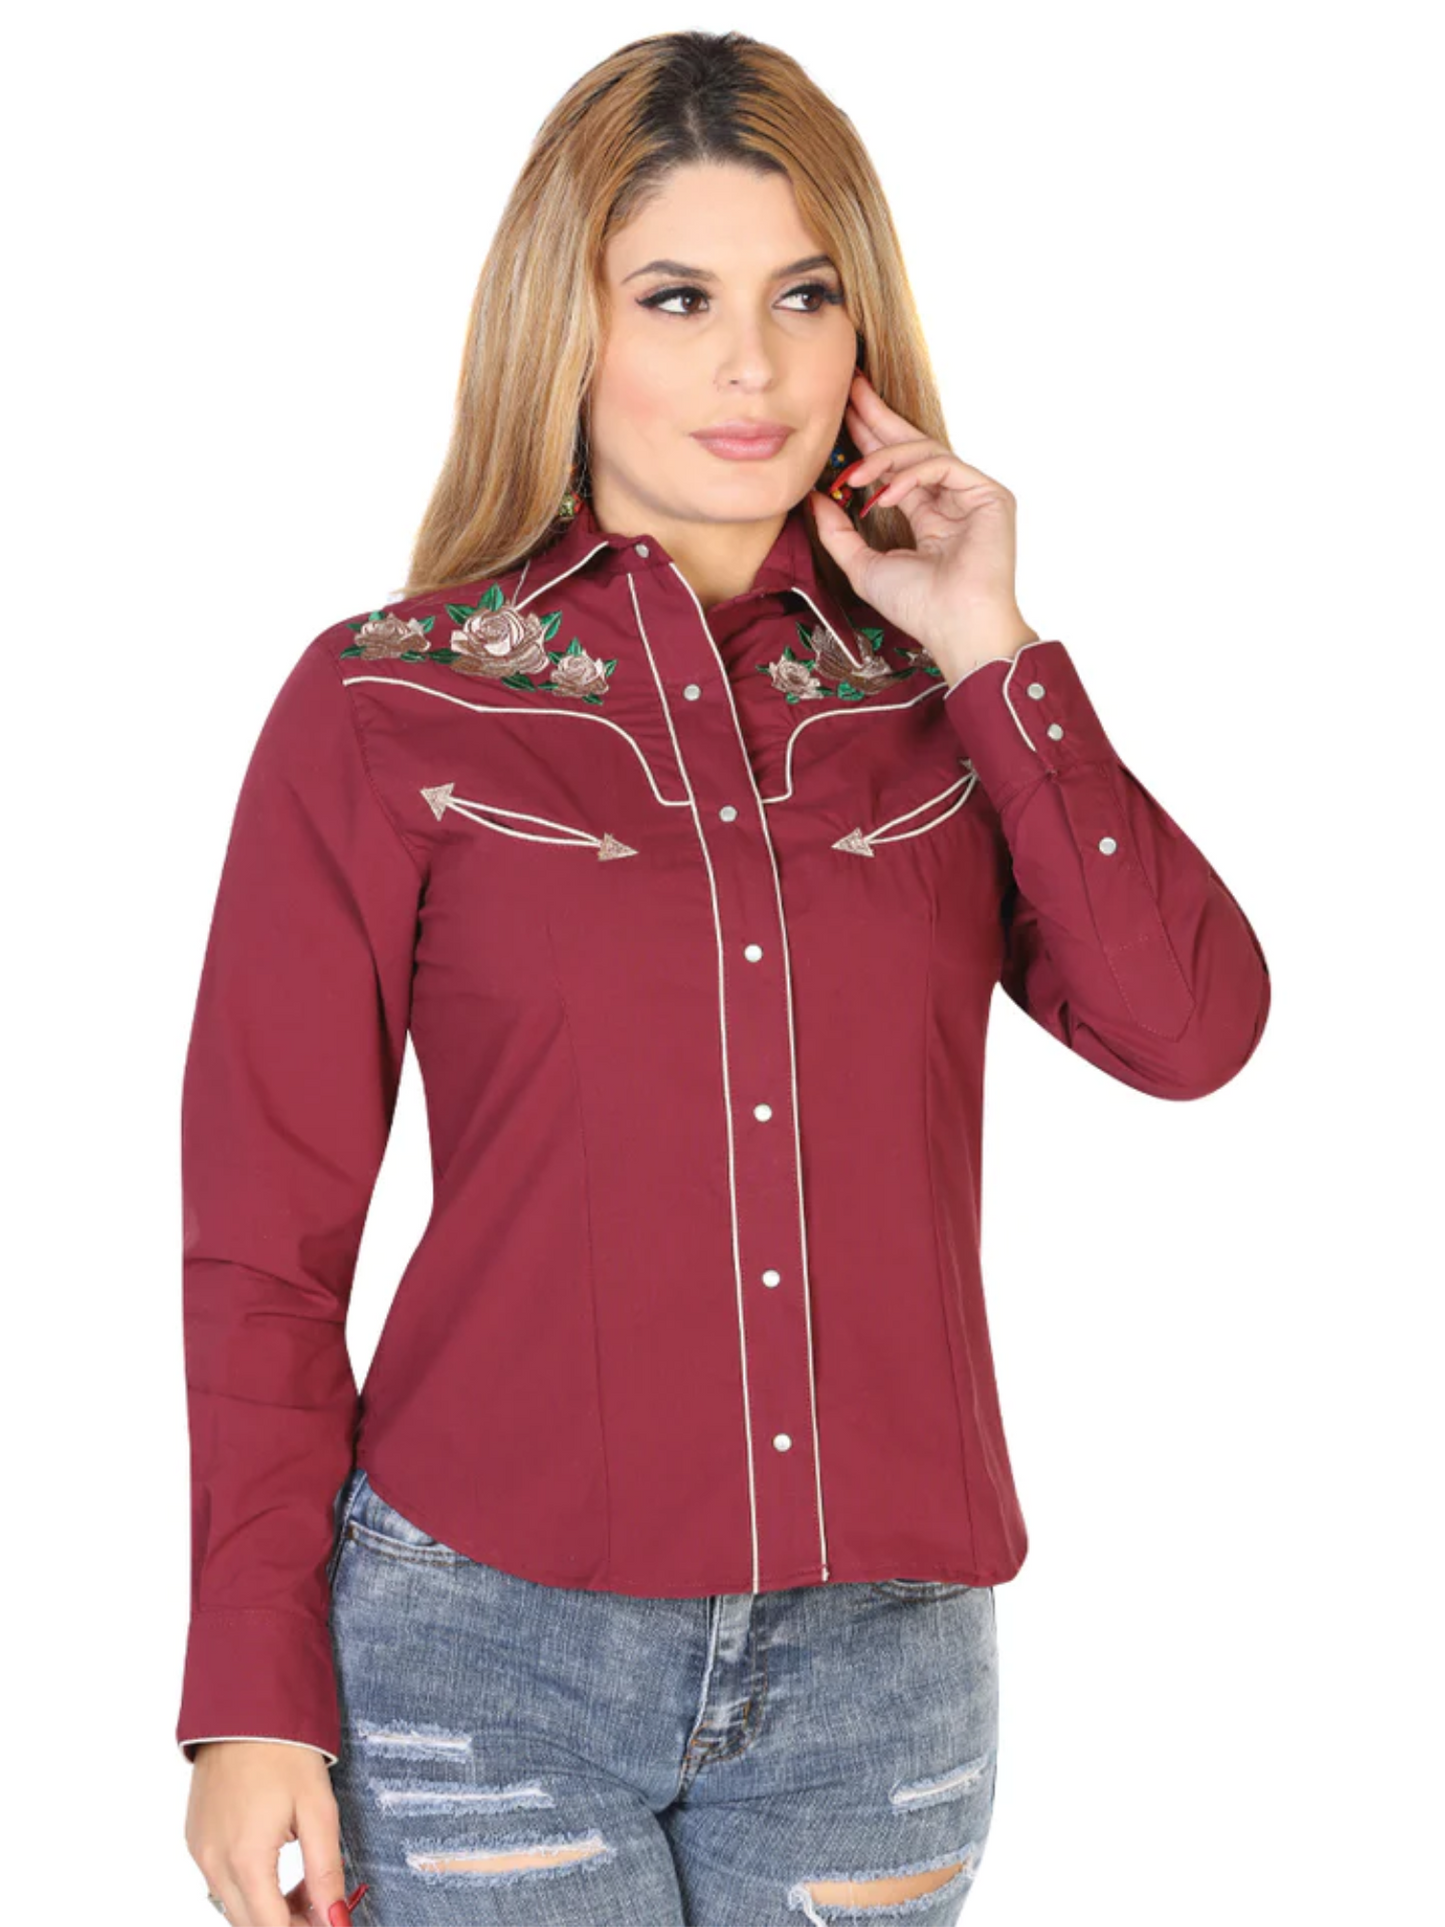 Wine Floral Embroidered Long Sleeve Denim Shirt for Women 'El General' - ID: 42965